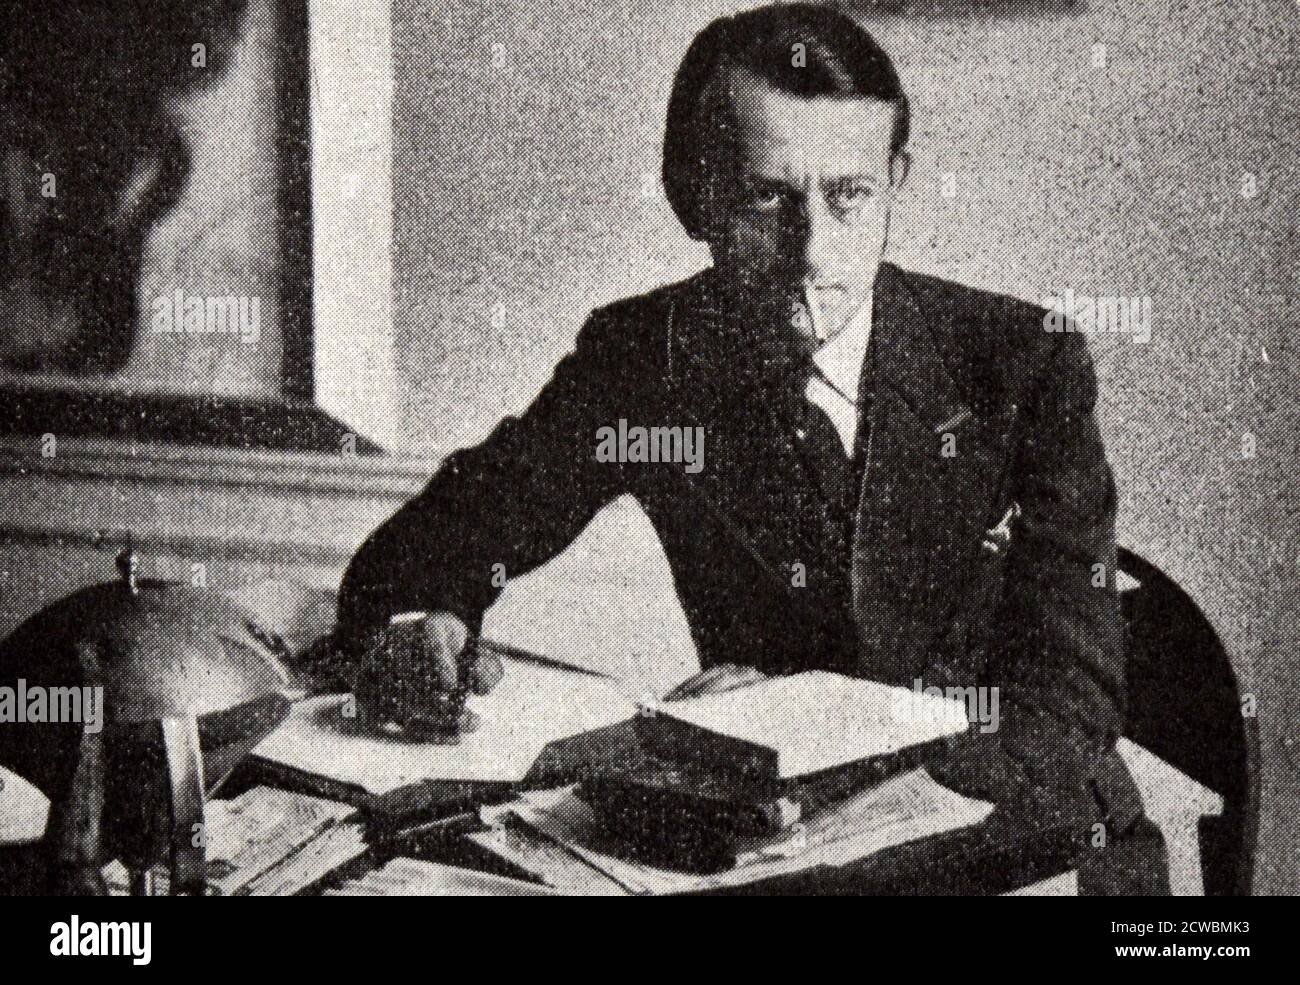 Black and white photograph of Andre Malraux (1901-1976), French novelist, art historian and statesman. Stock Photo